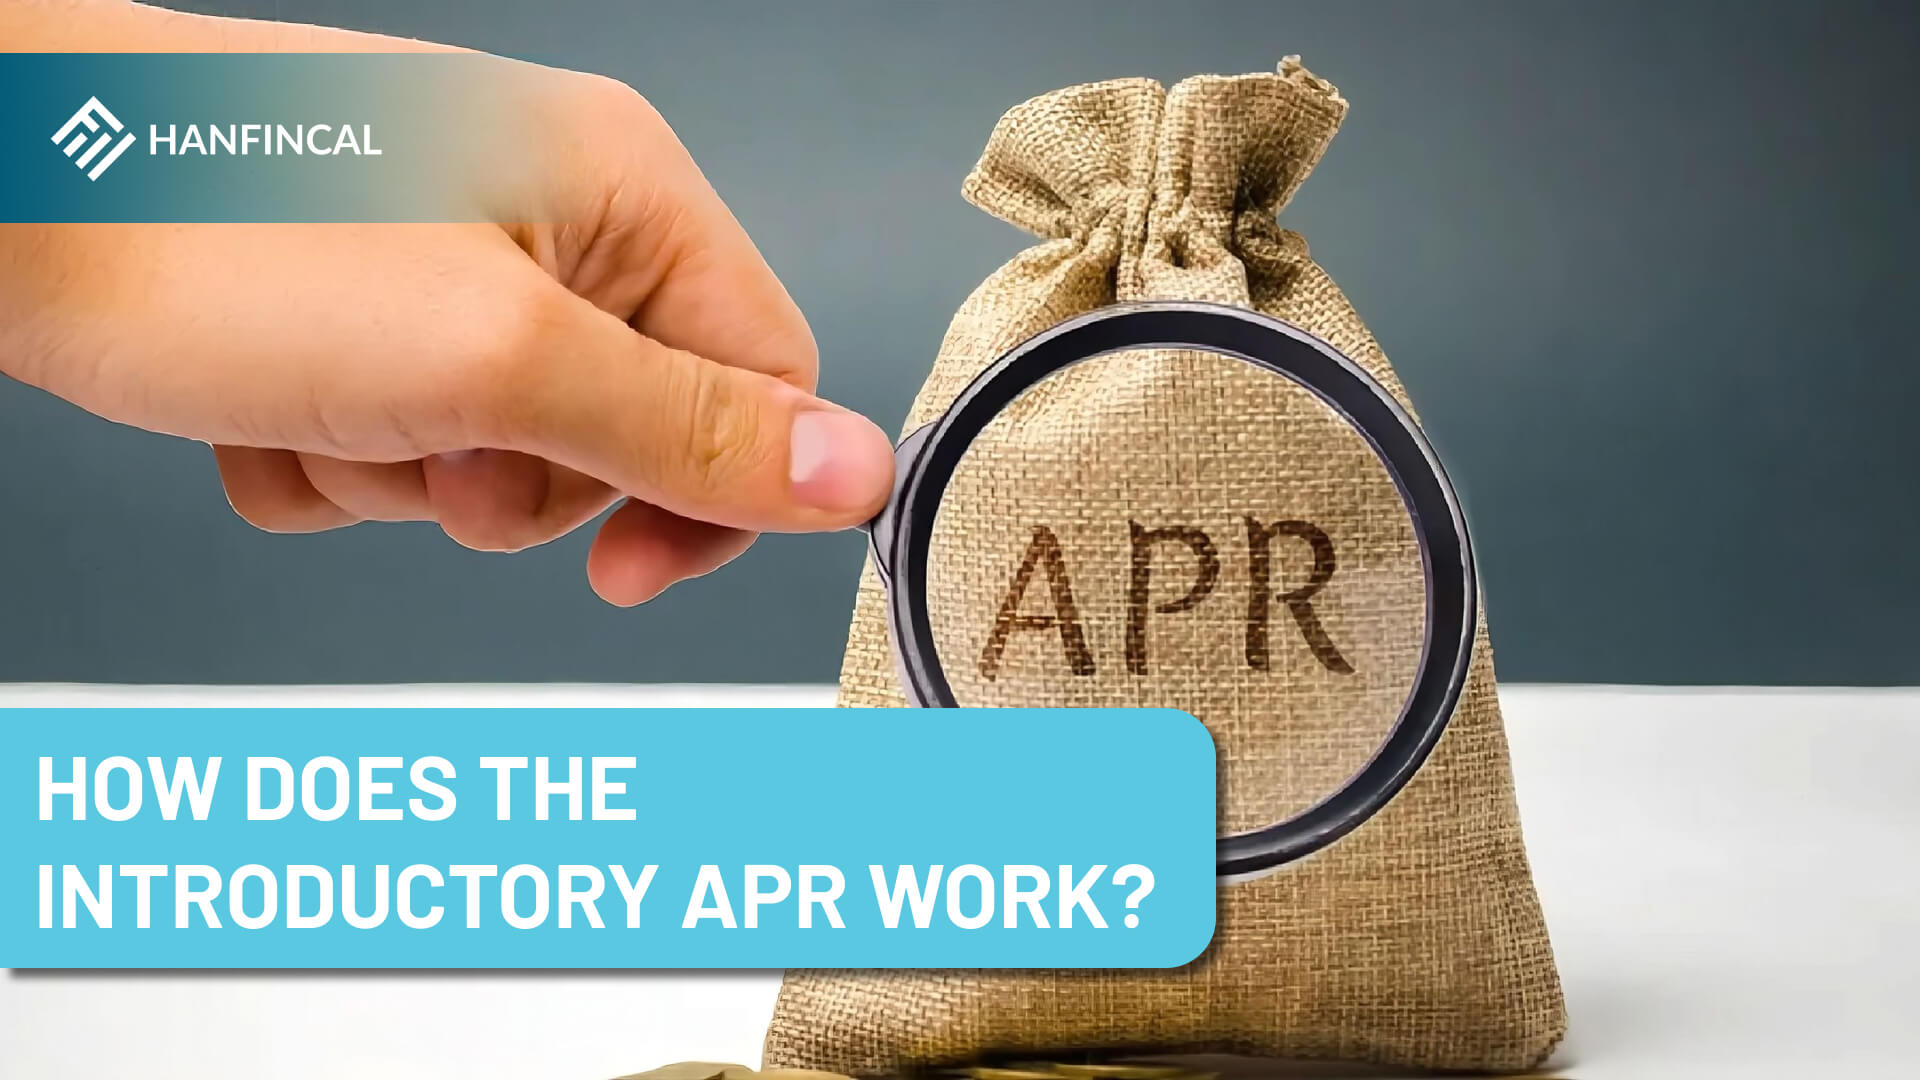 How does the introductory APR work?